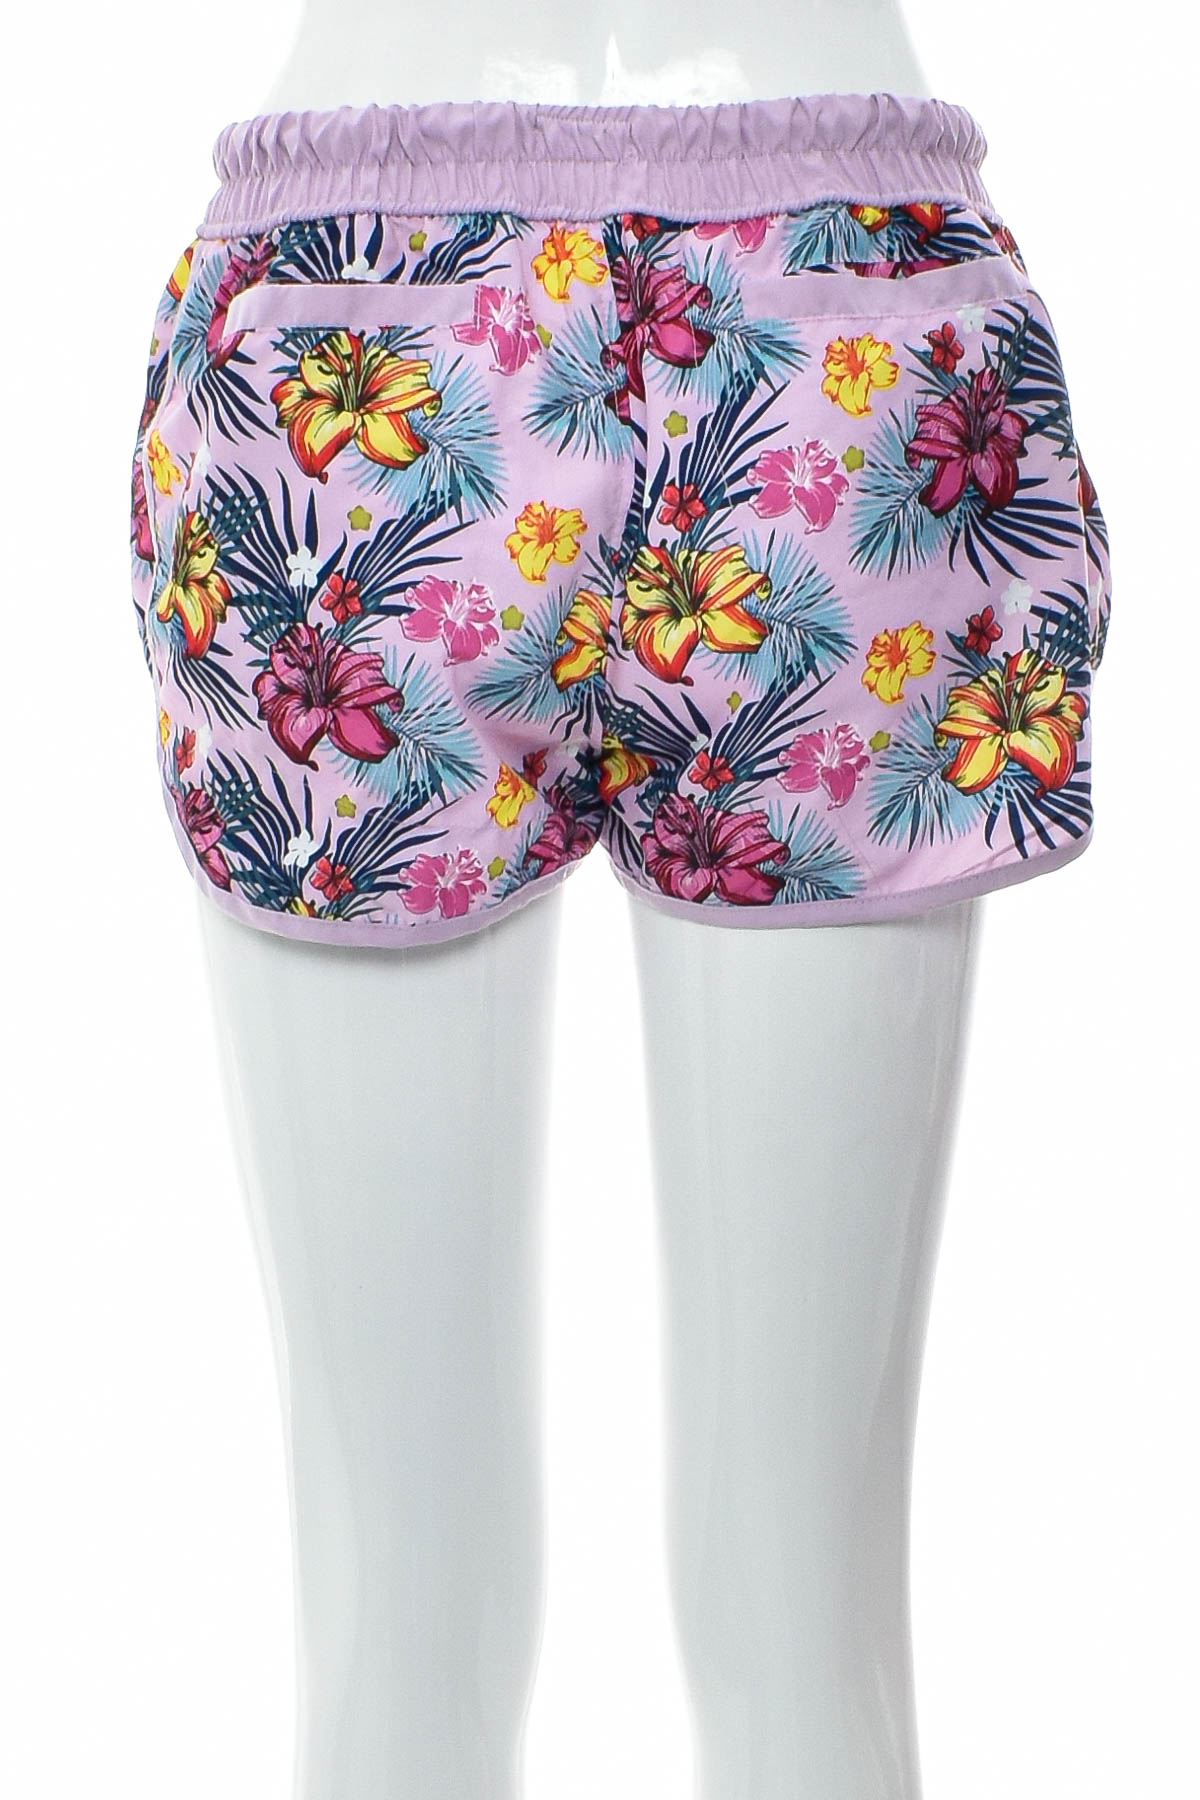 Women's shorts - MAUI and SONS - 1